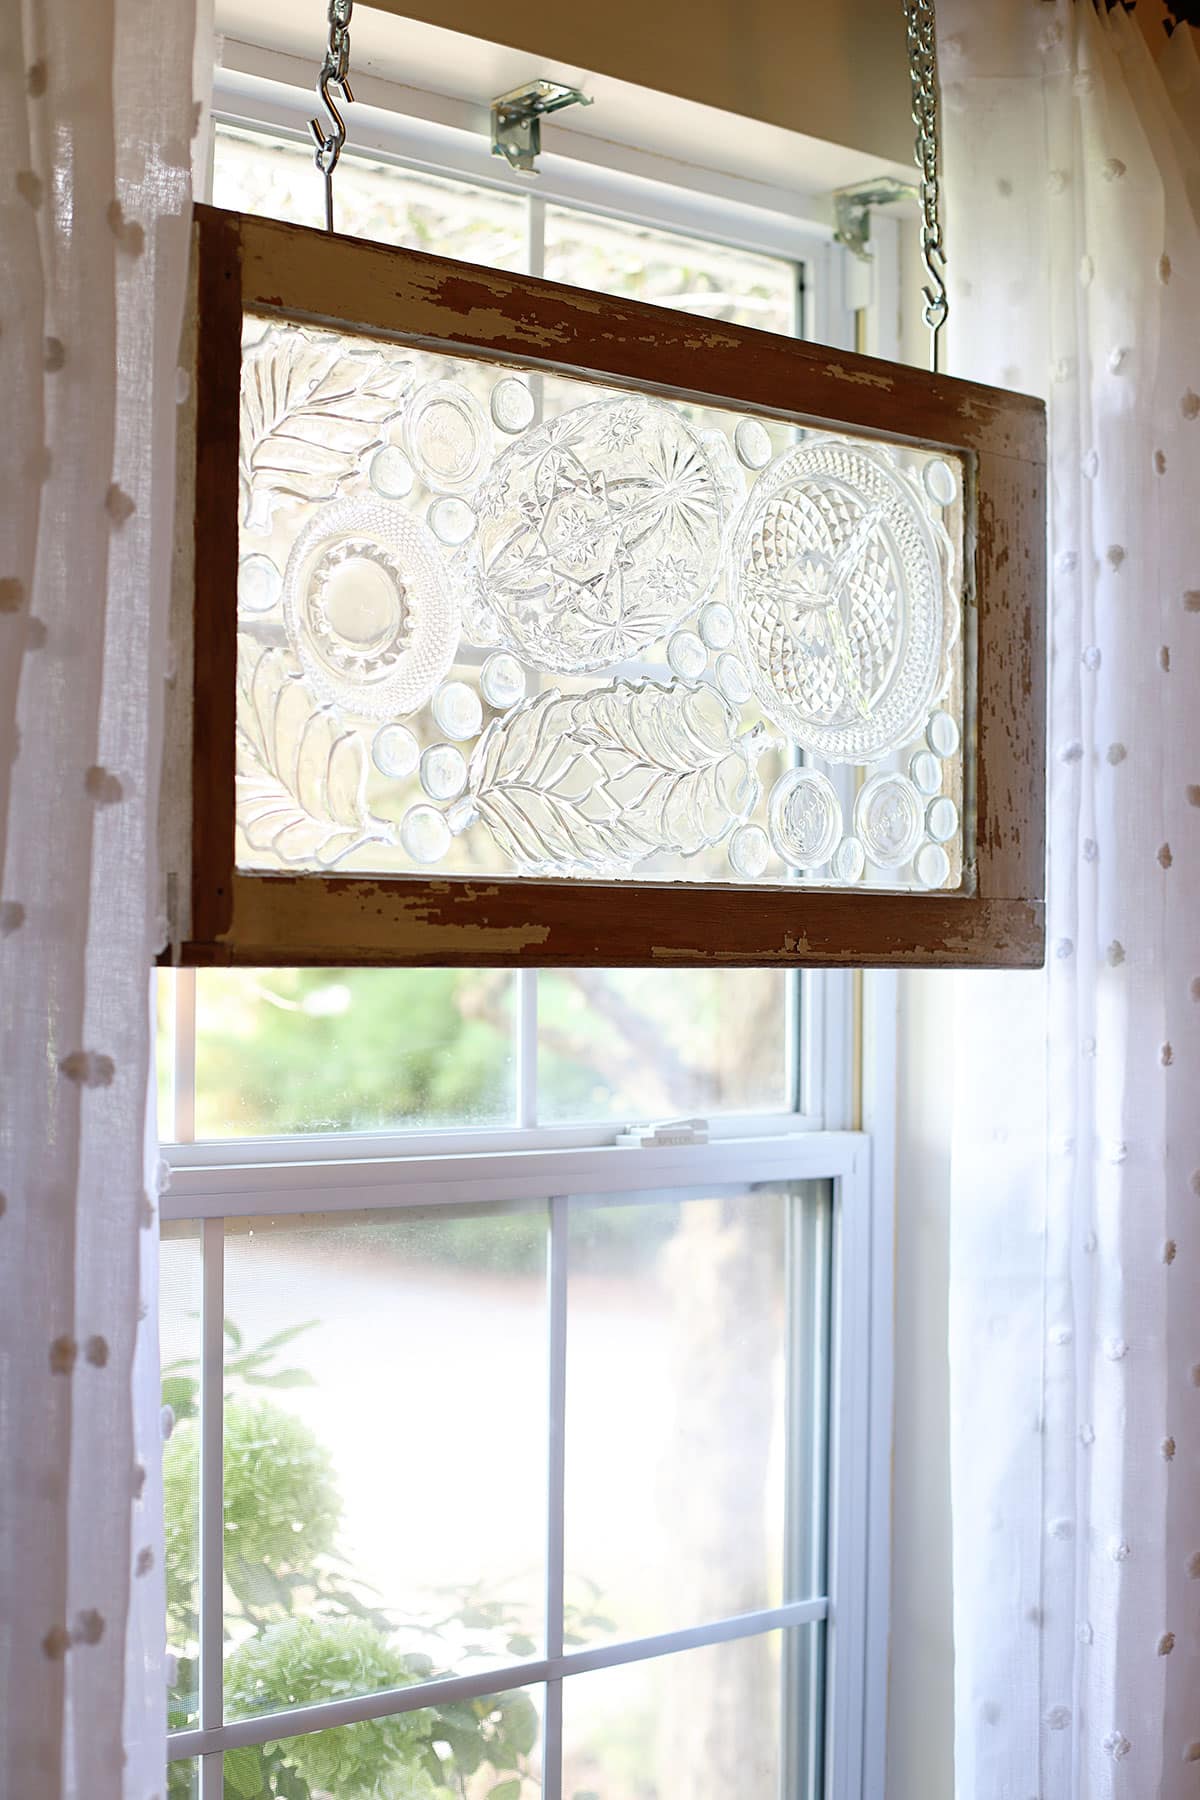 Learn how to turn an old window into a piece of amazing window art using pressed glass plates from thrift stores.